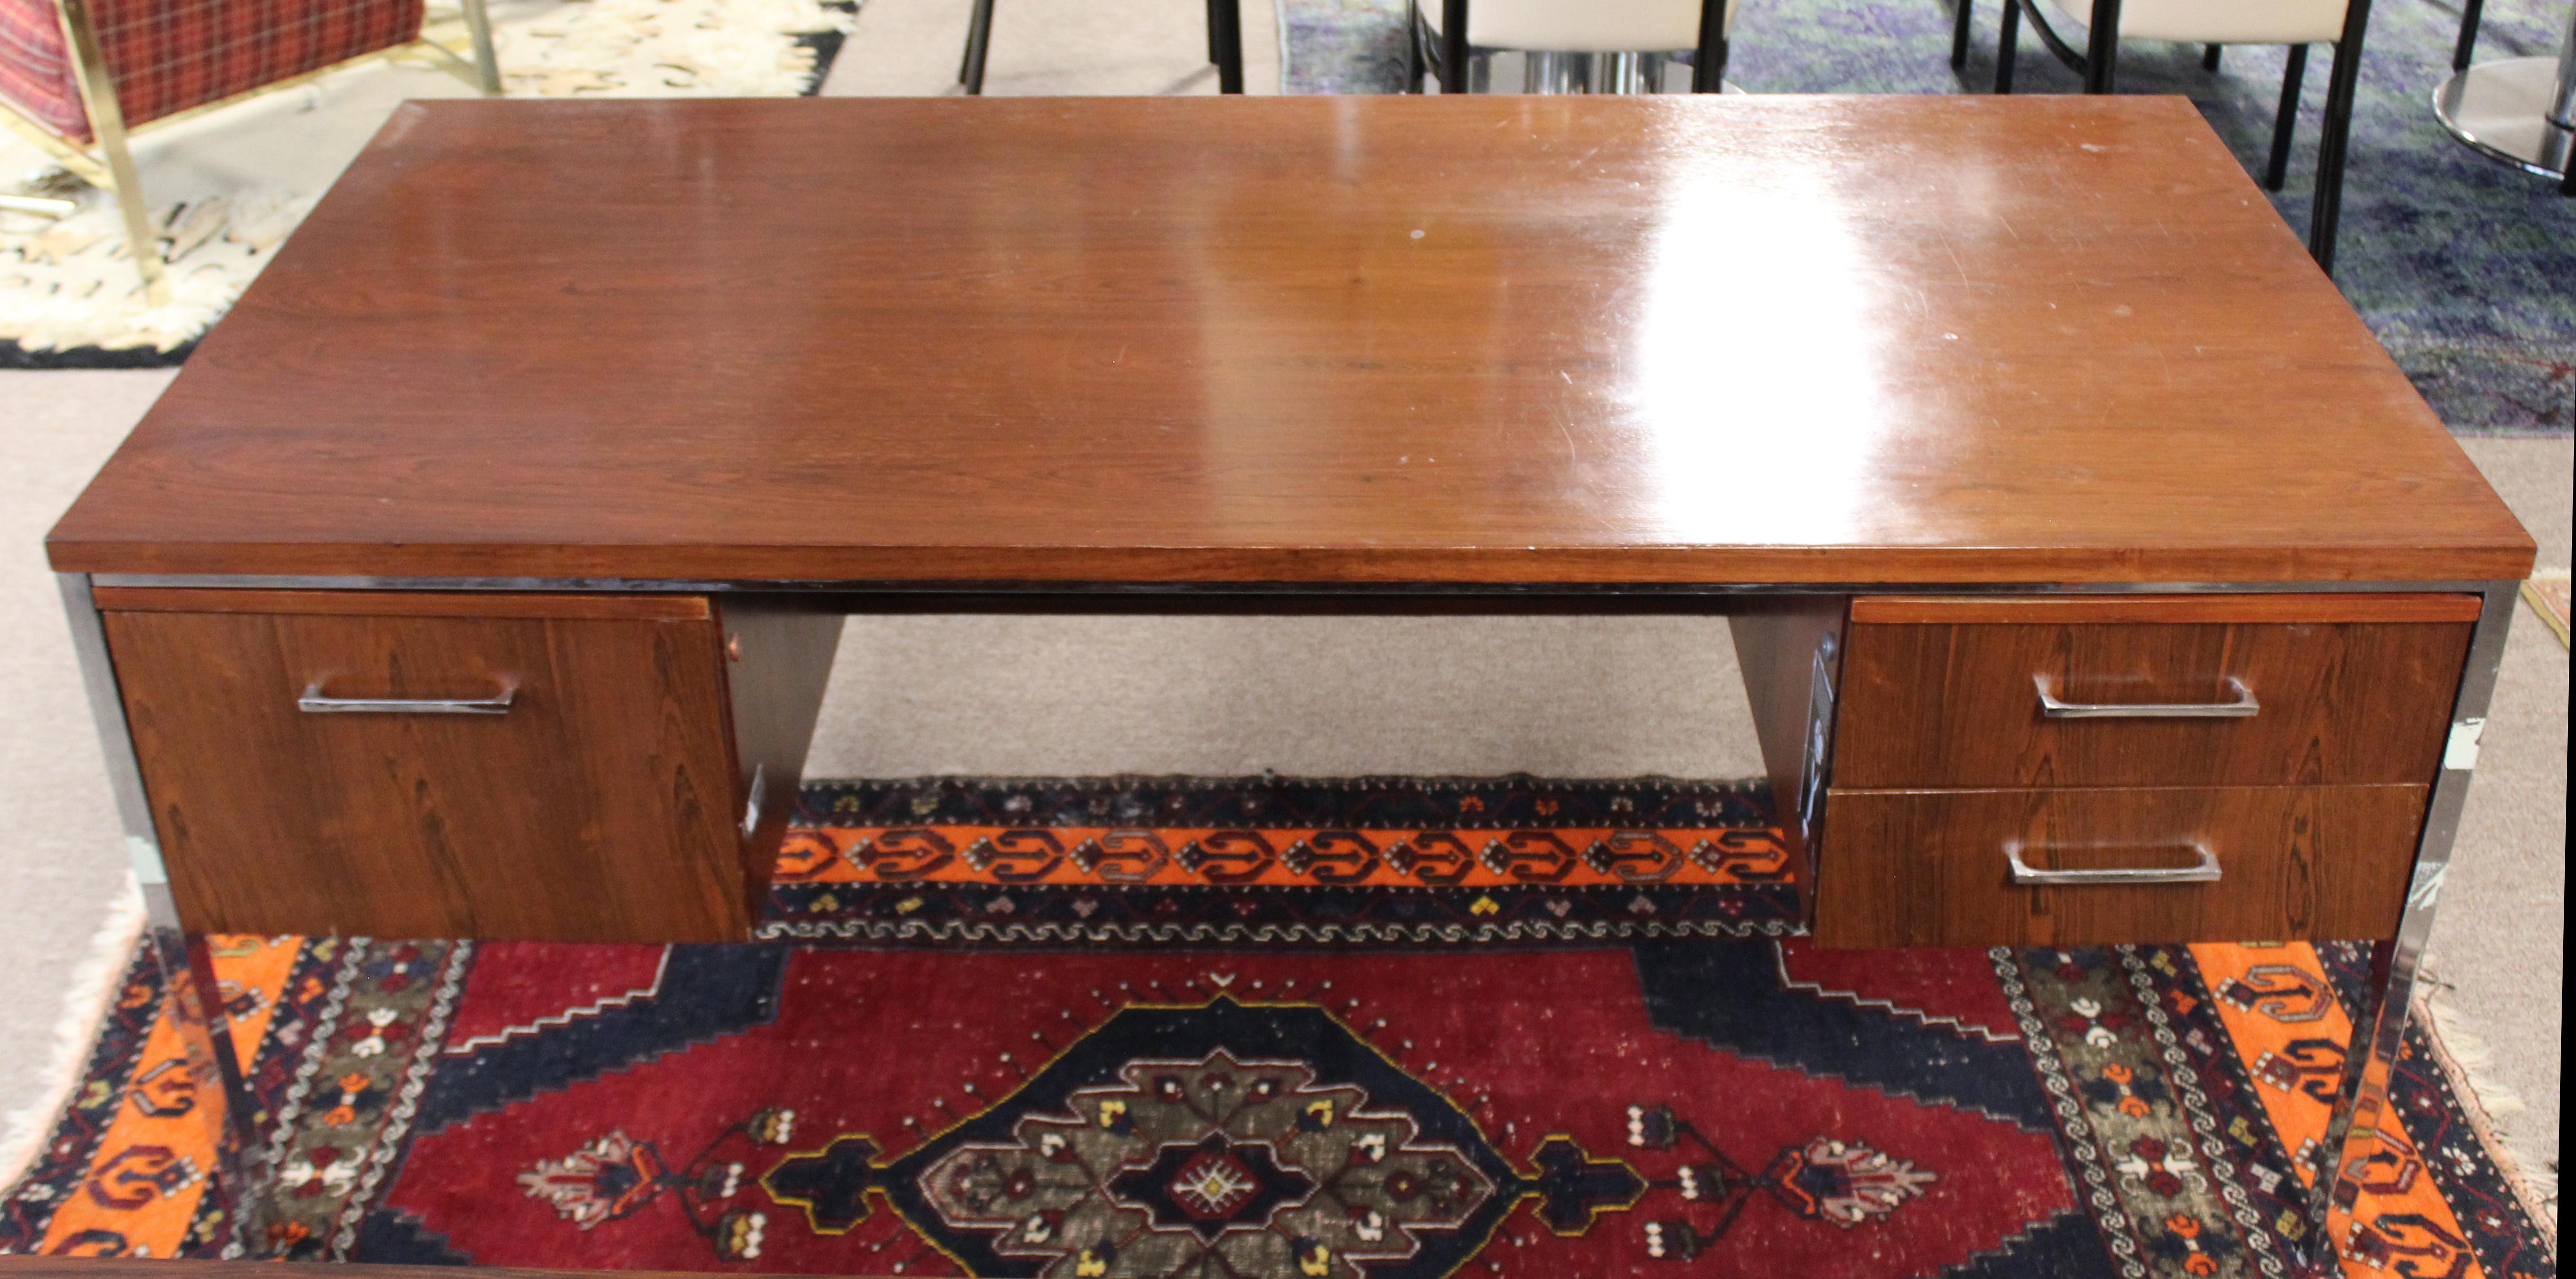 For your consideration is a delightful, executive desk, made of rosewood, with three drawers, including one for files, by Alma Desk Company, circa 1960s. In fair vintage condition. The dimensions are 72